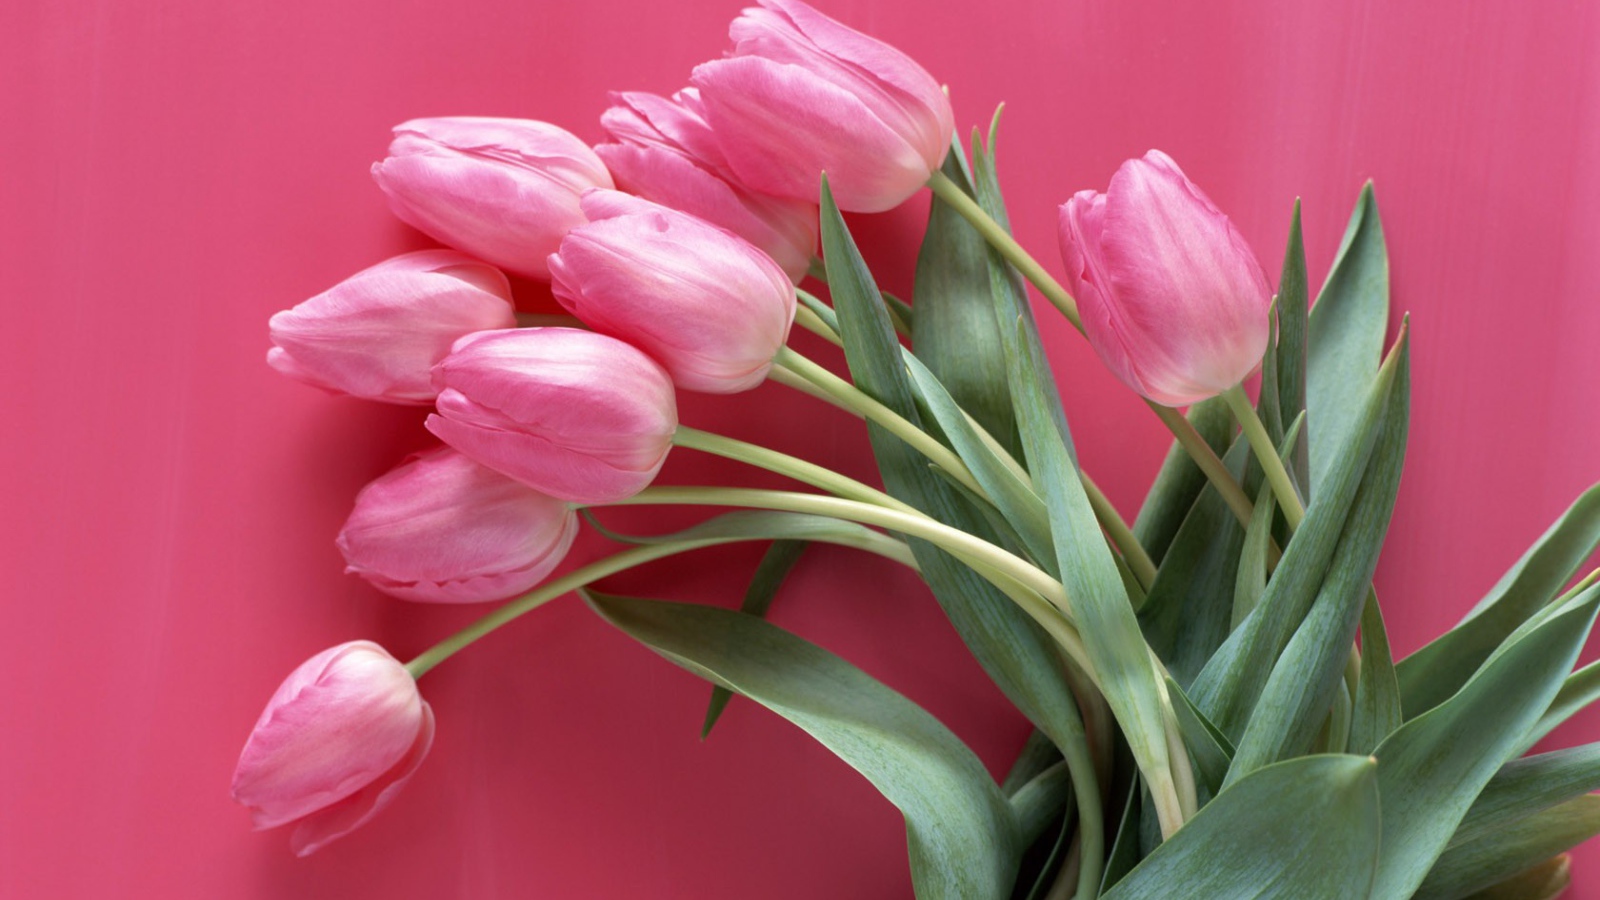 Tulips on a pink background